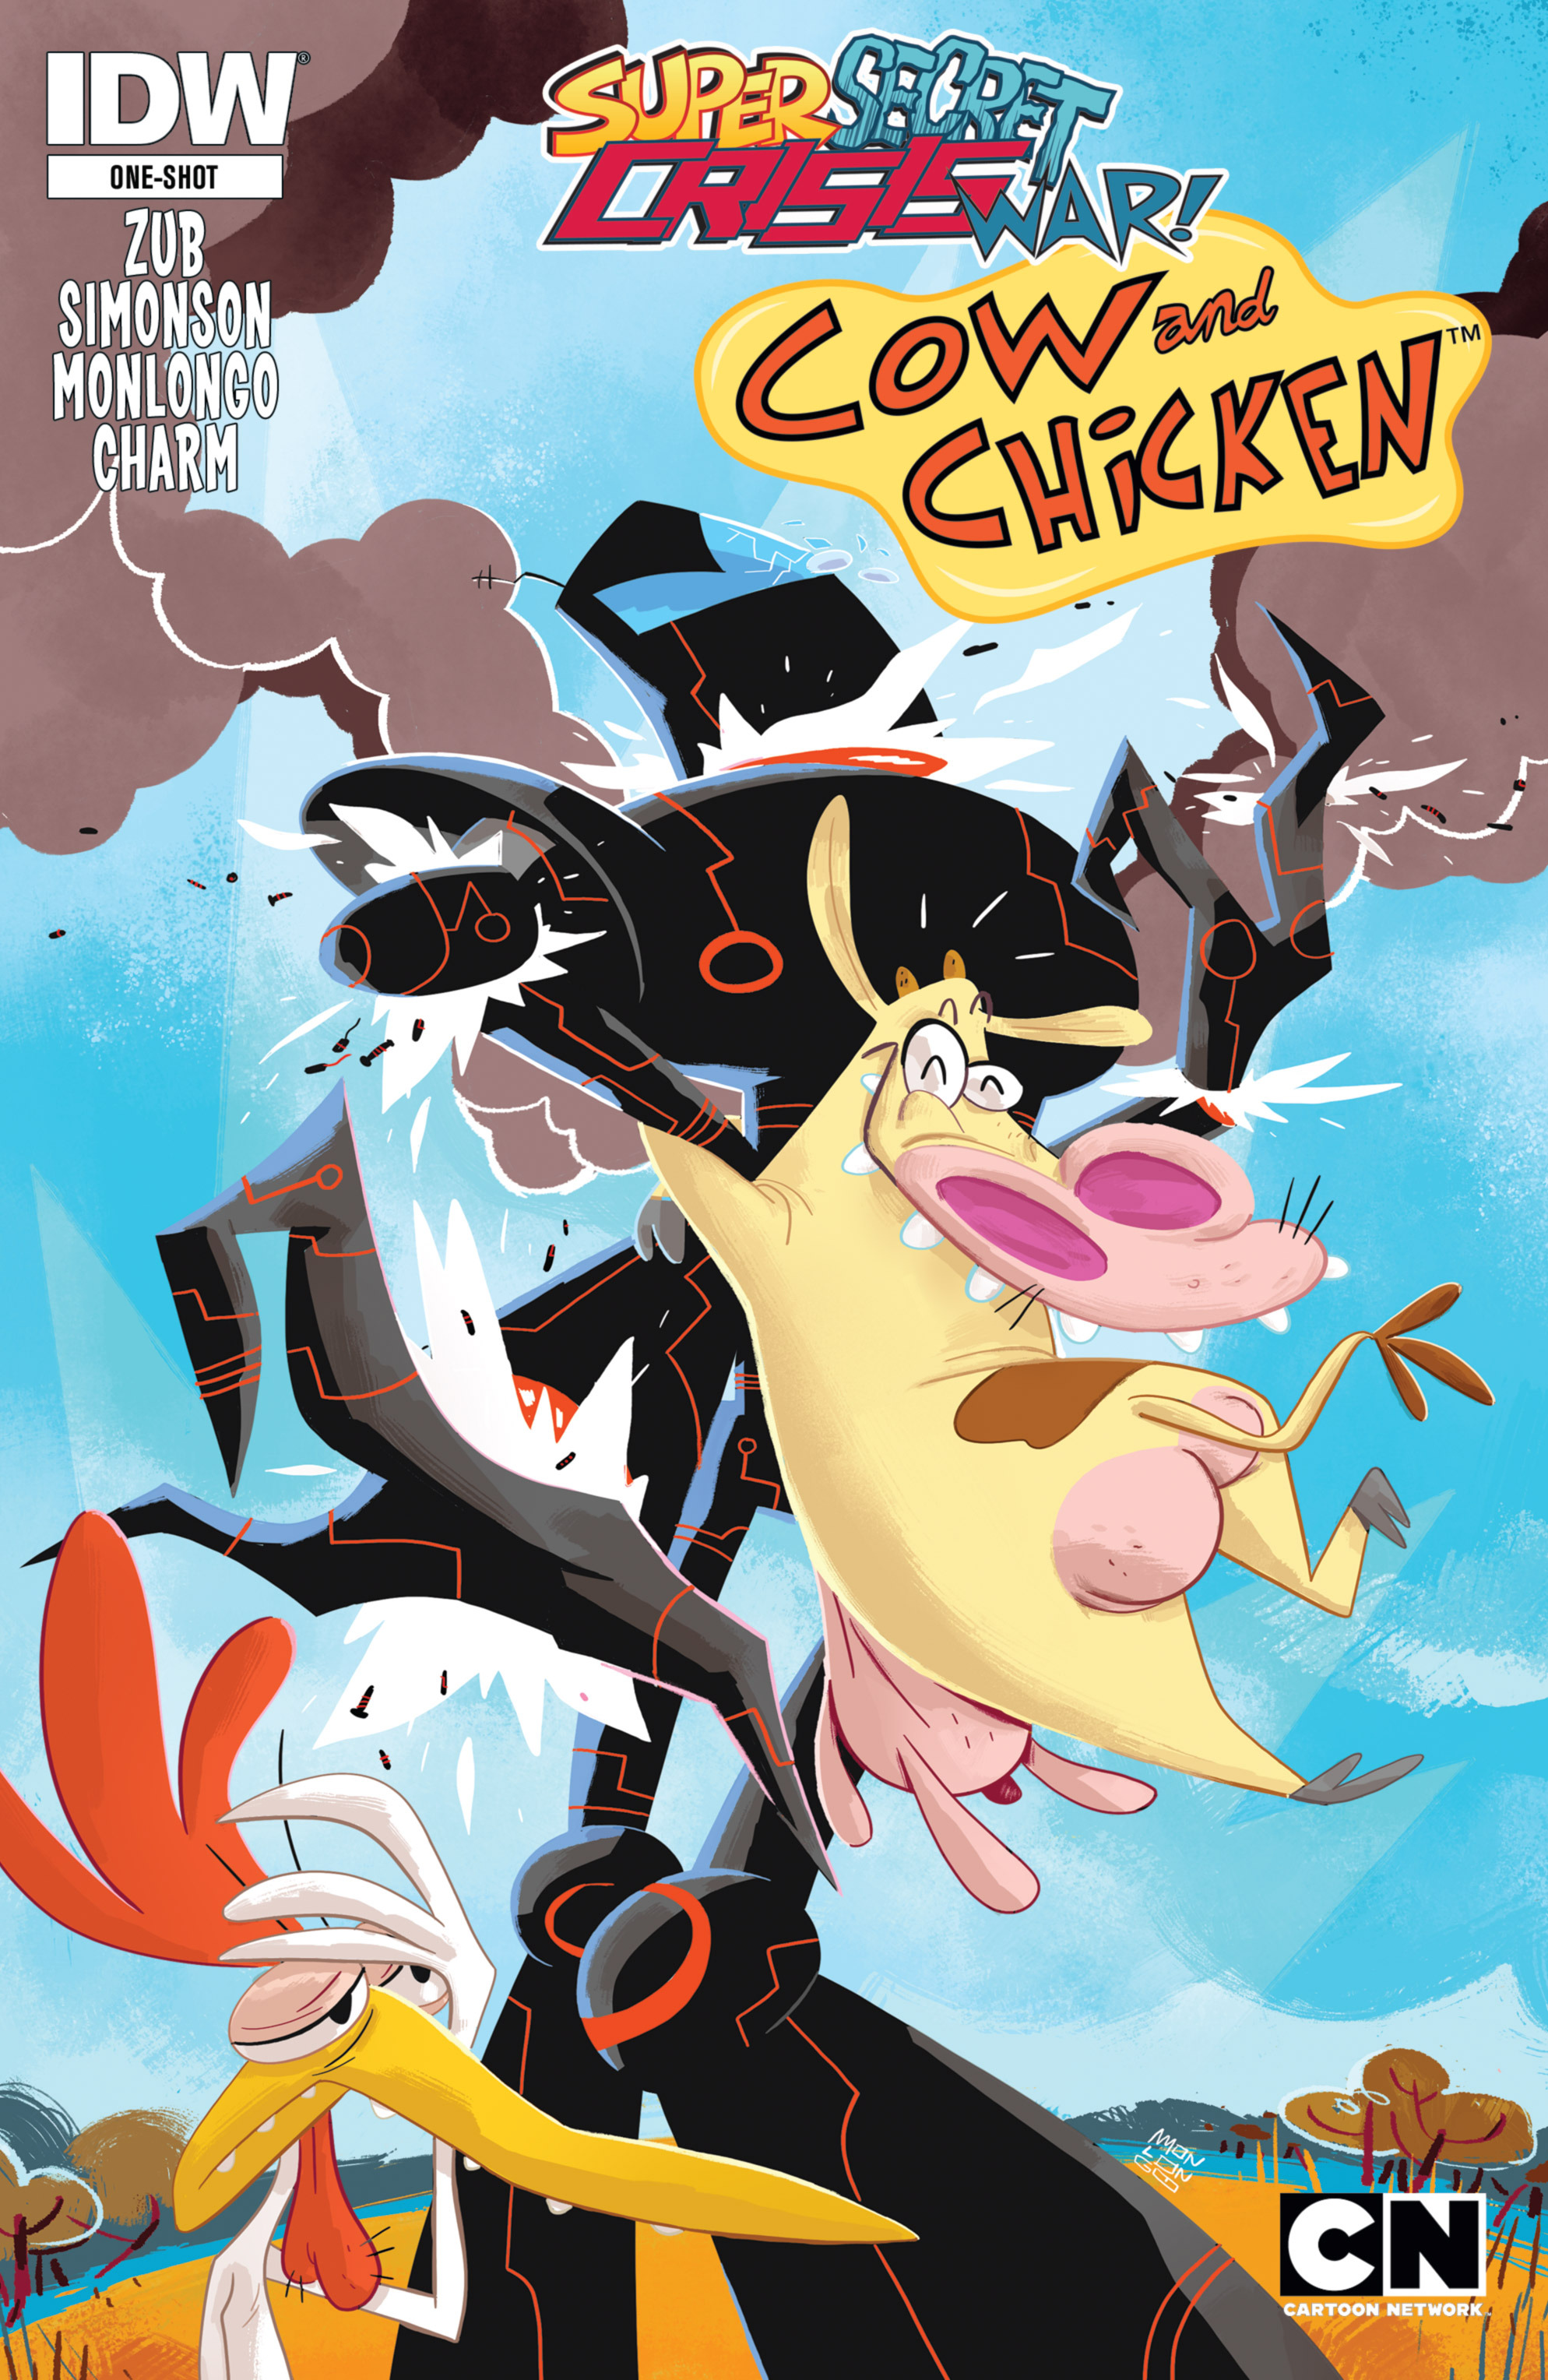 Read online Super Secret Crisis War! comic -  Issue # _Special - Cow and Chicken - 1